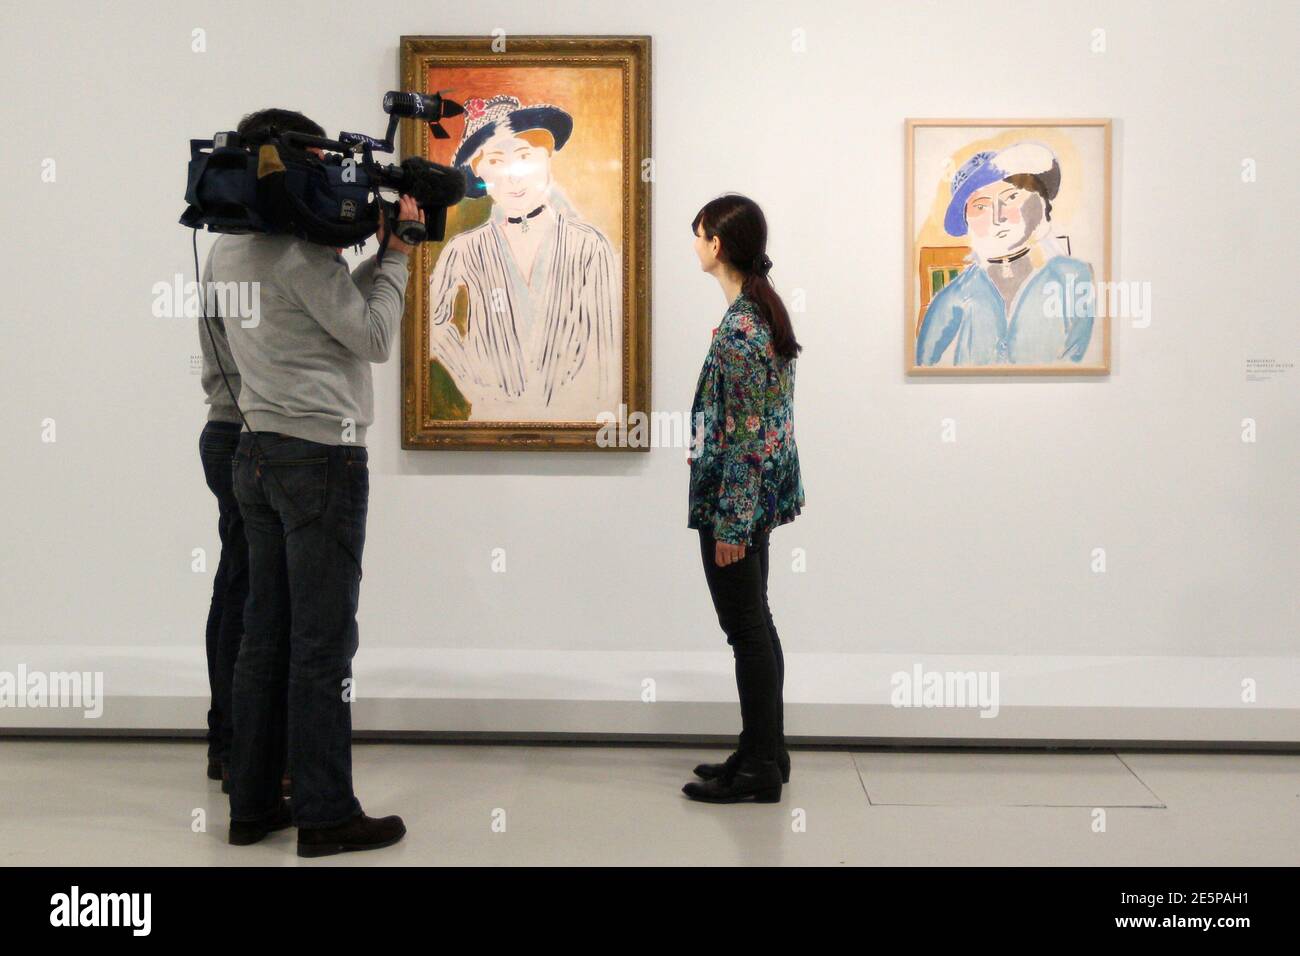 Journalists work in front of the paintings "Marguerite a la veste Rayee"  (Striped Jacket, 1914) at L and "Marguerite au Chapeau de cuir" (Marguerite  with a leather hat, 1914) by French painter